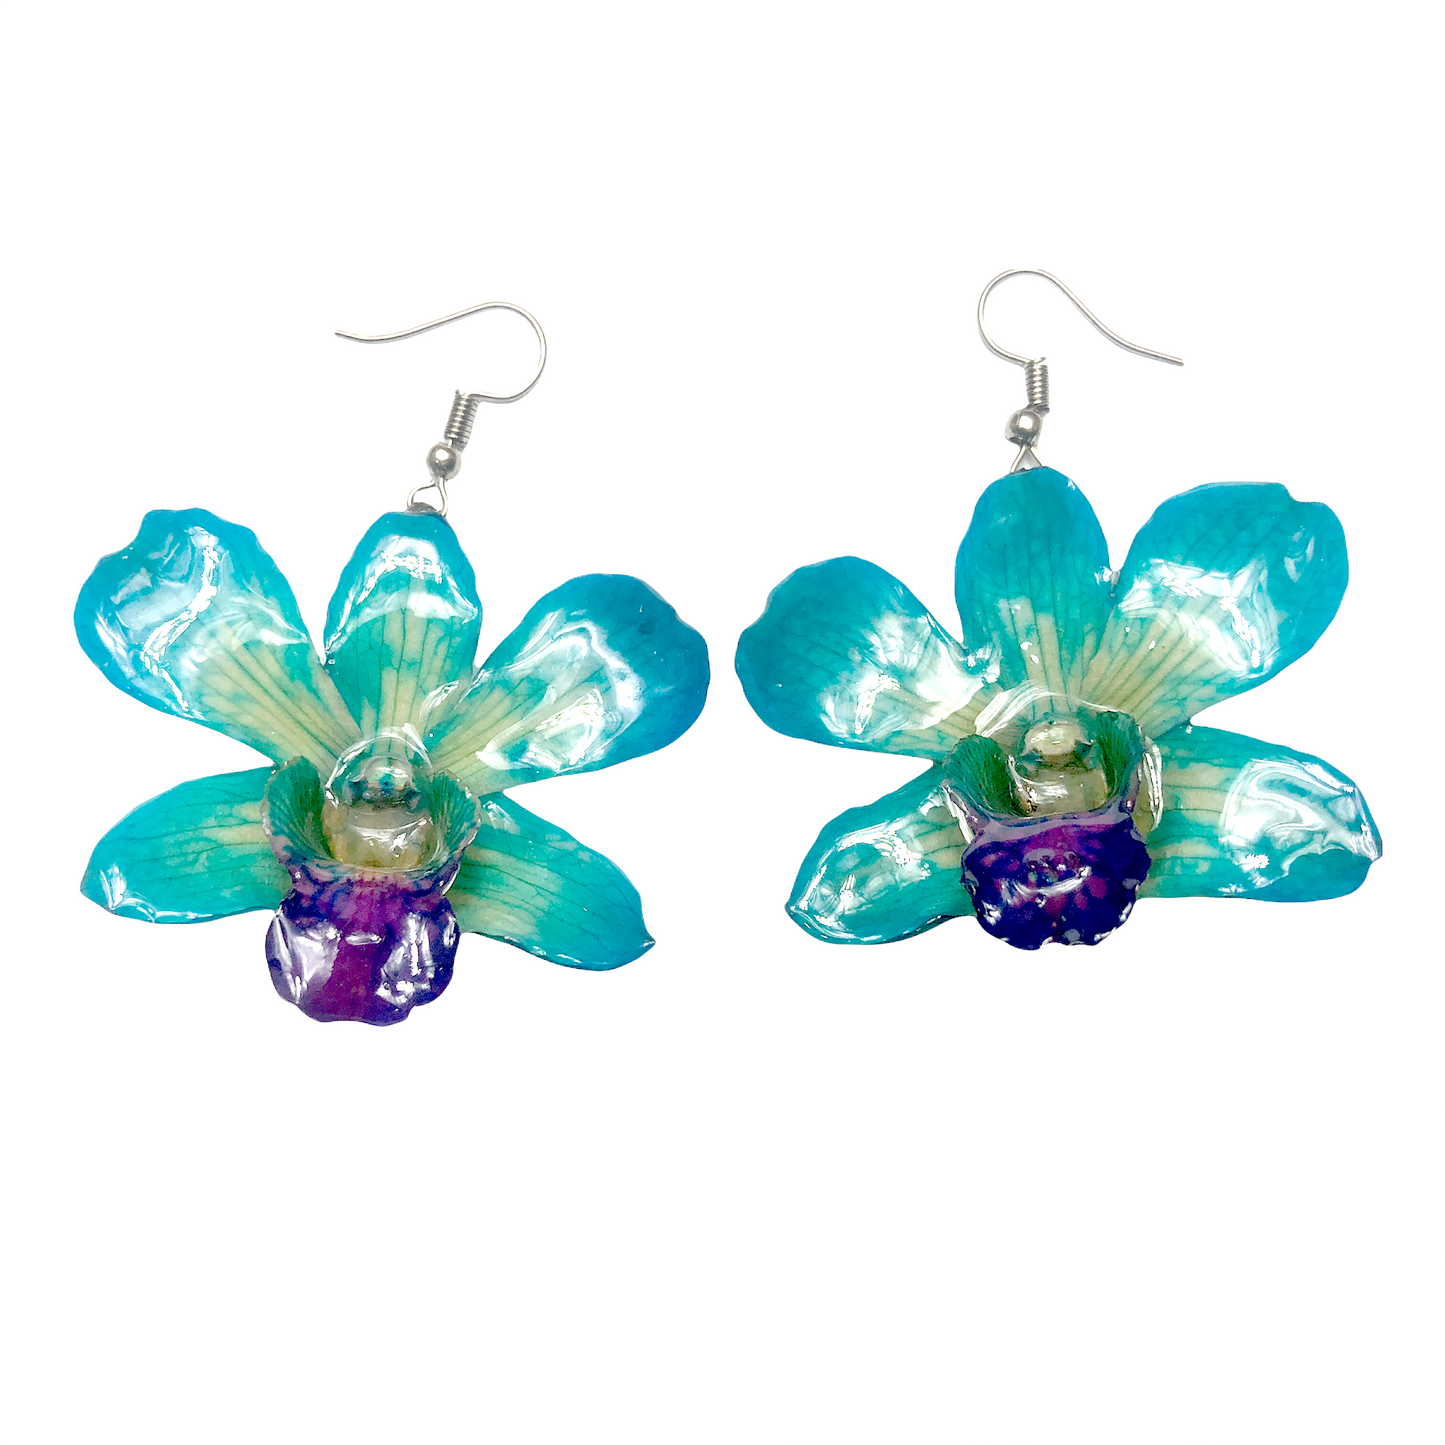 Mini "Dendrobium" Lucy Orchid Earring (Light Blue)